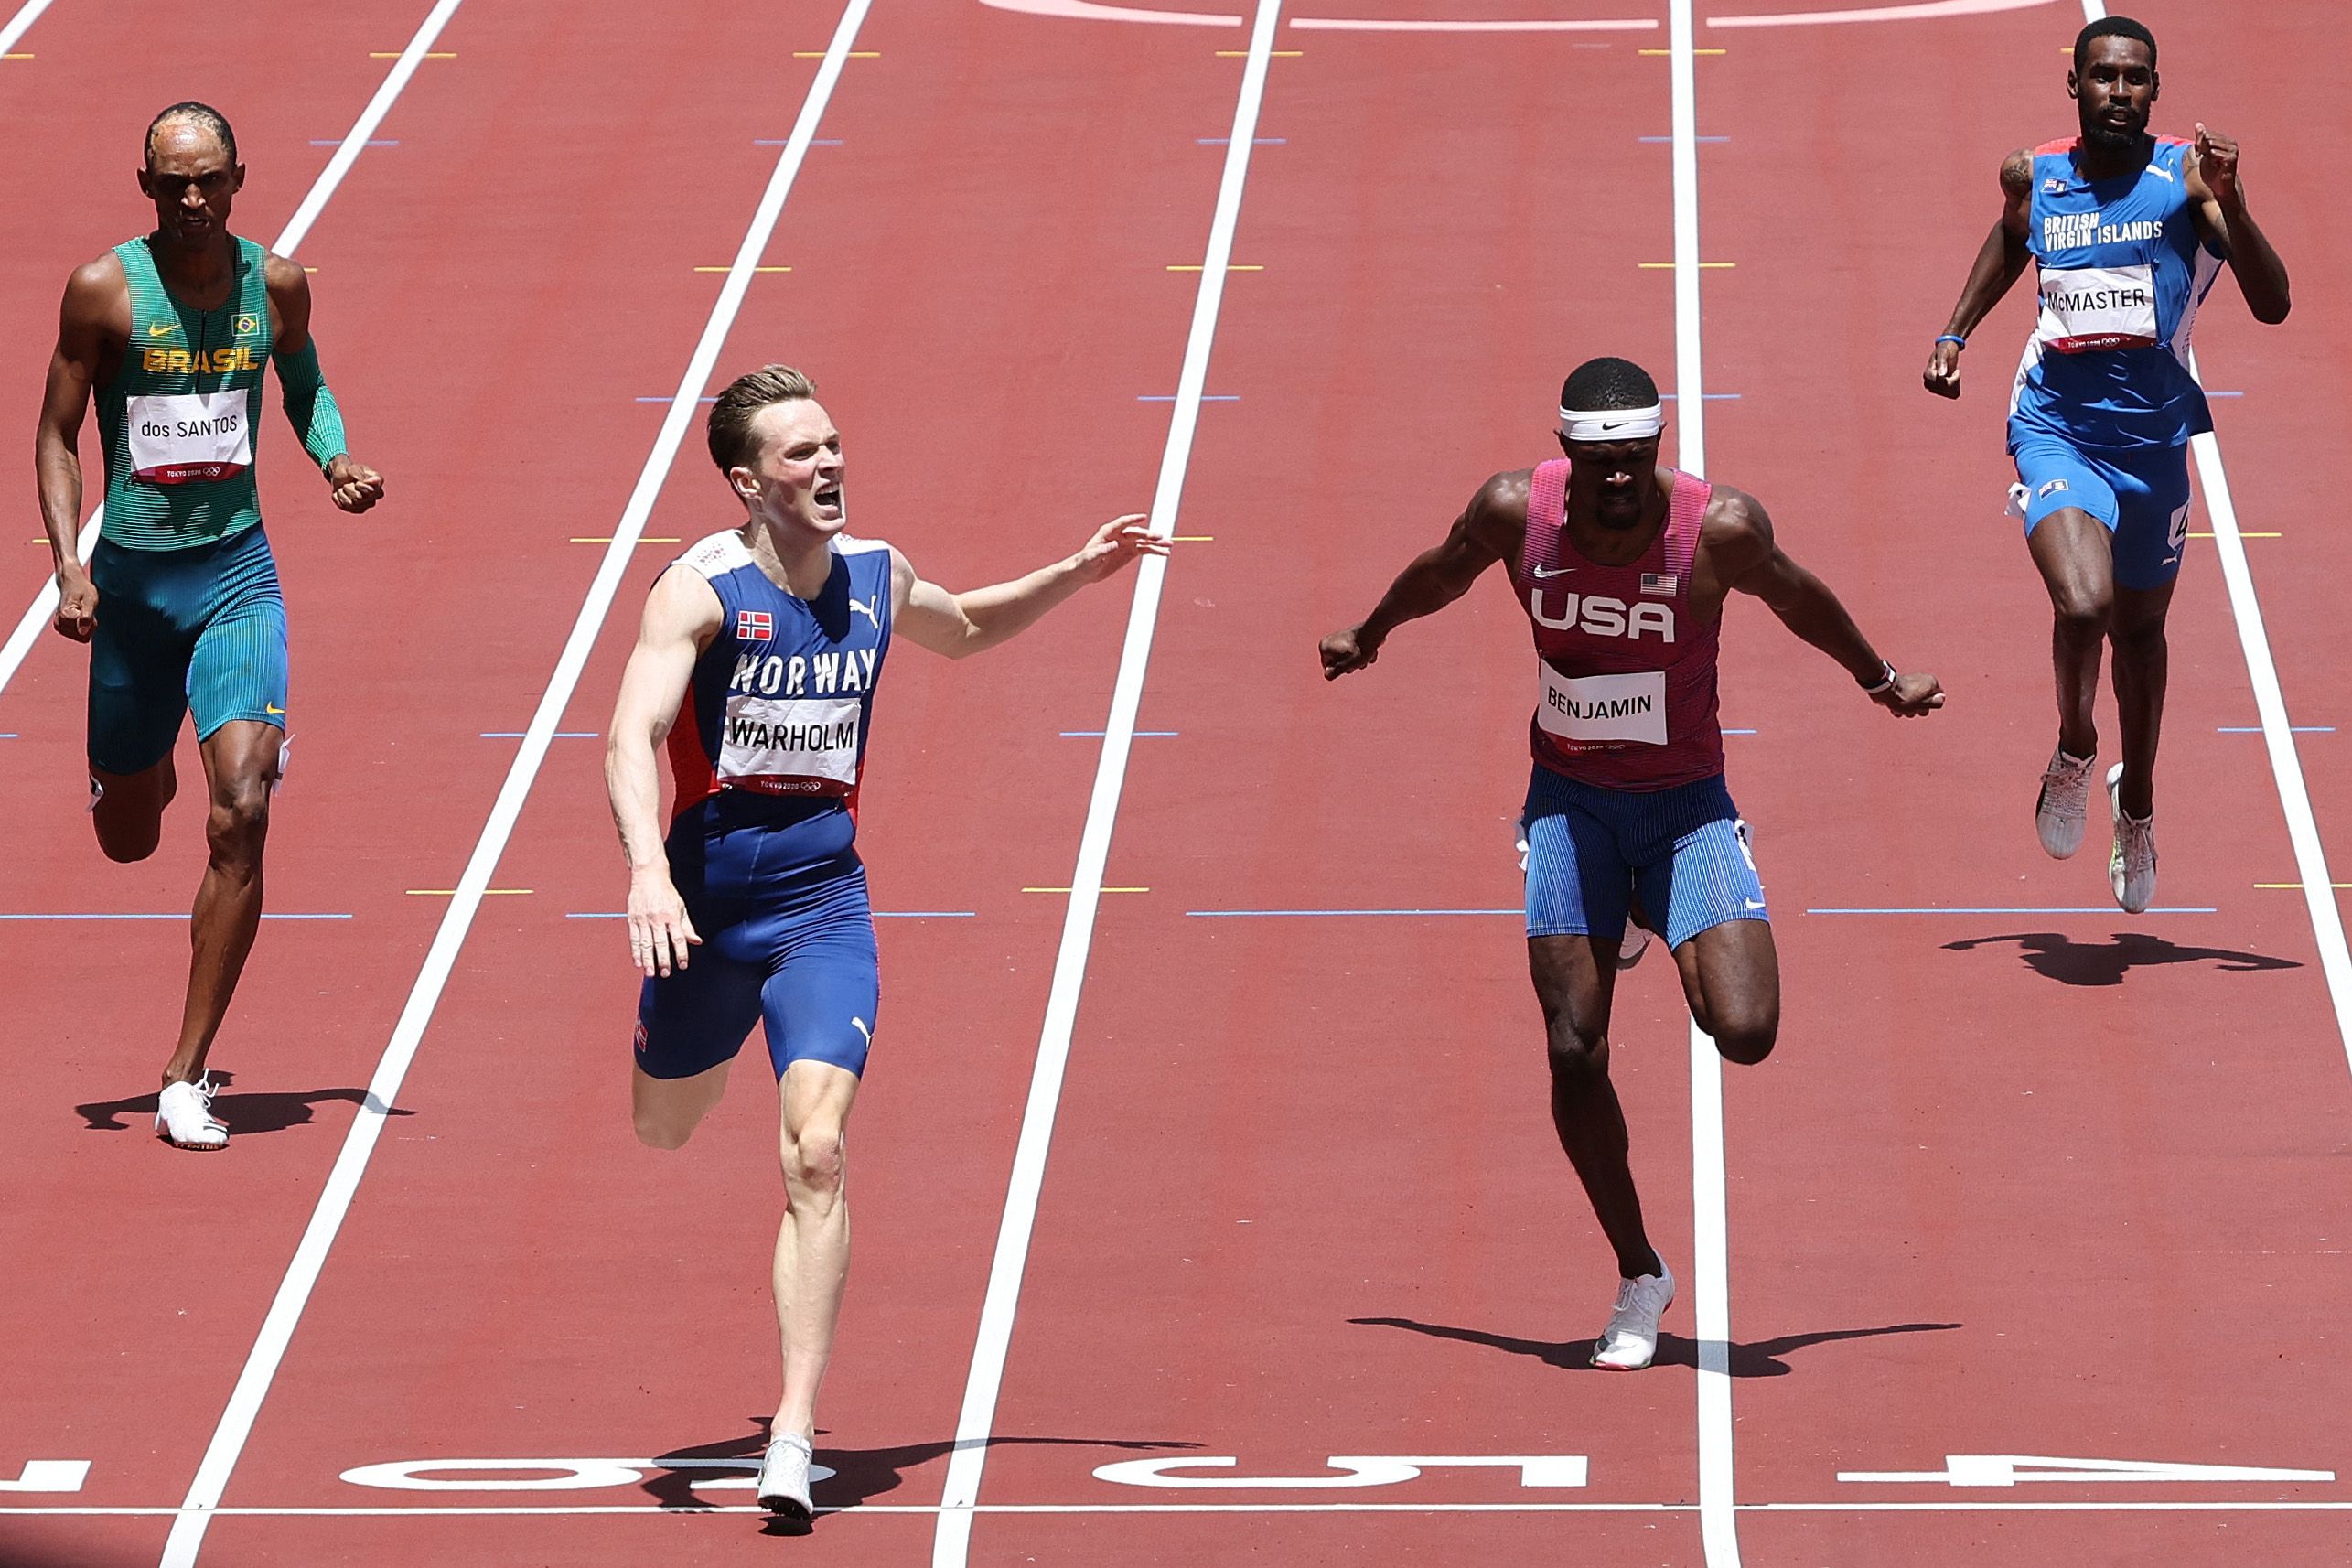  Norway's Karsten Warholm (2L) crosses the finish to win and break the world record ahead of second-placed USA's Rai Benjamin (2R) in the men's 400m hurdles